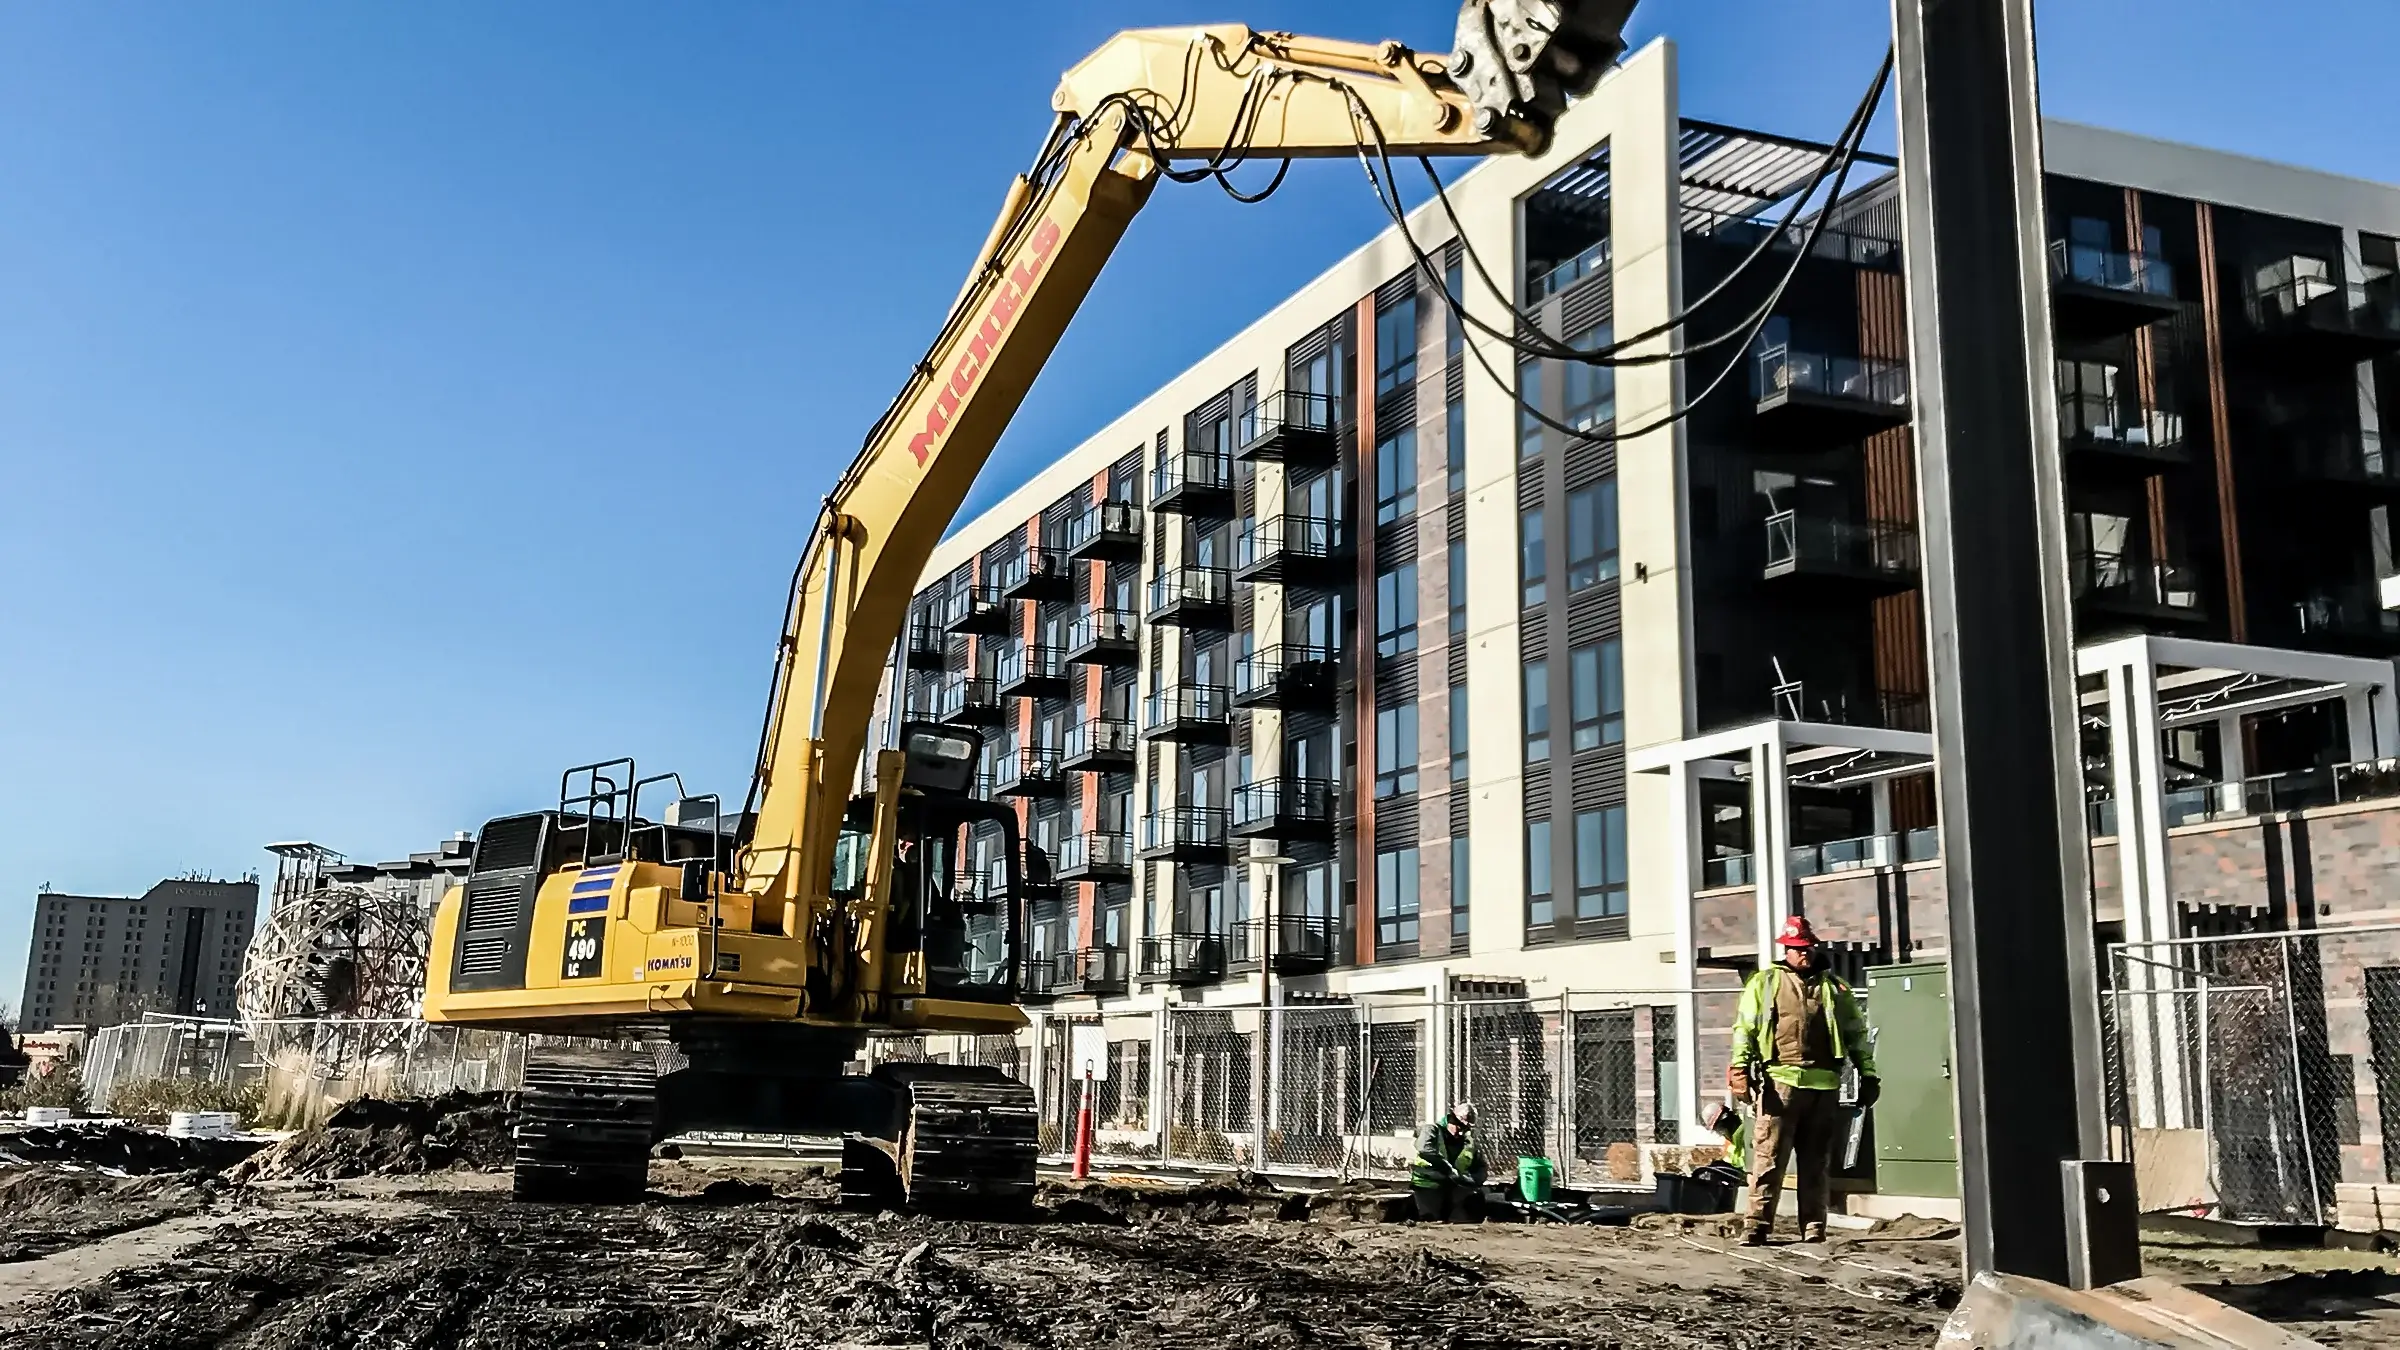 An excavator operates on a foundations job near an housing complex.